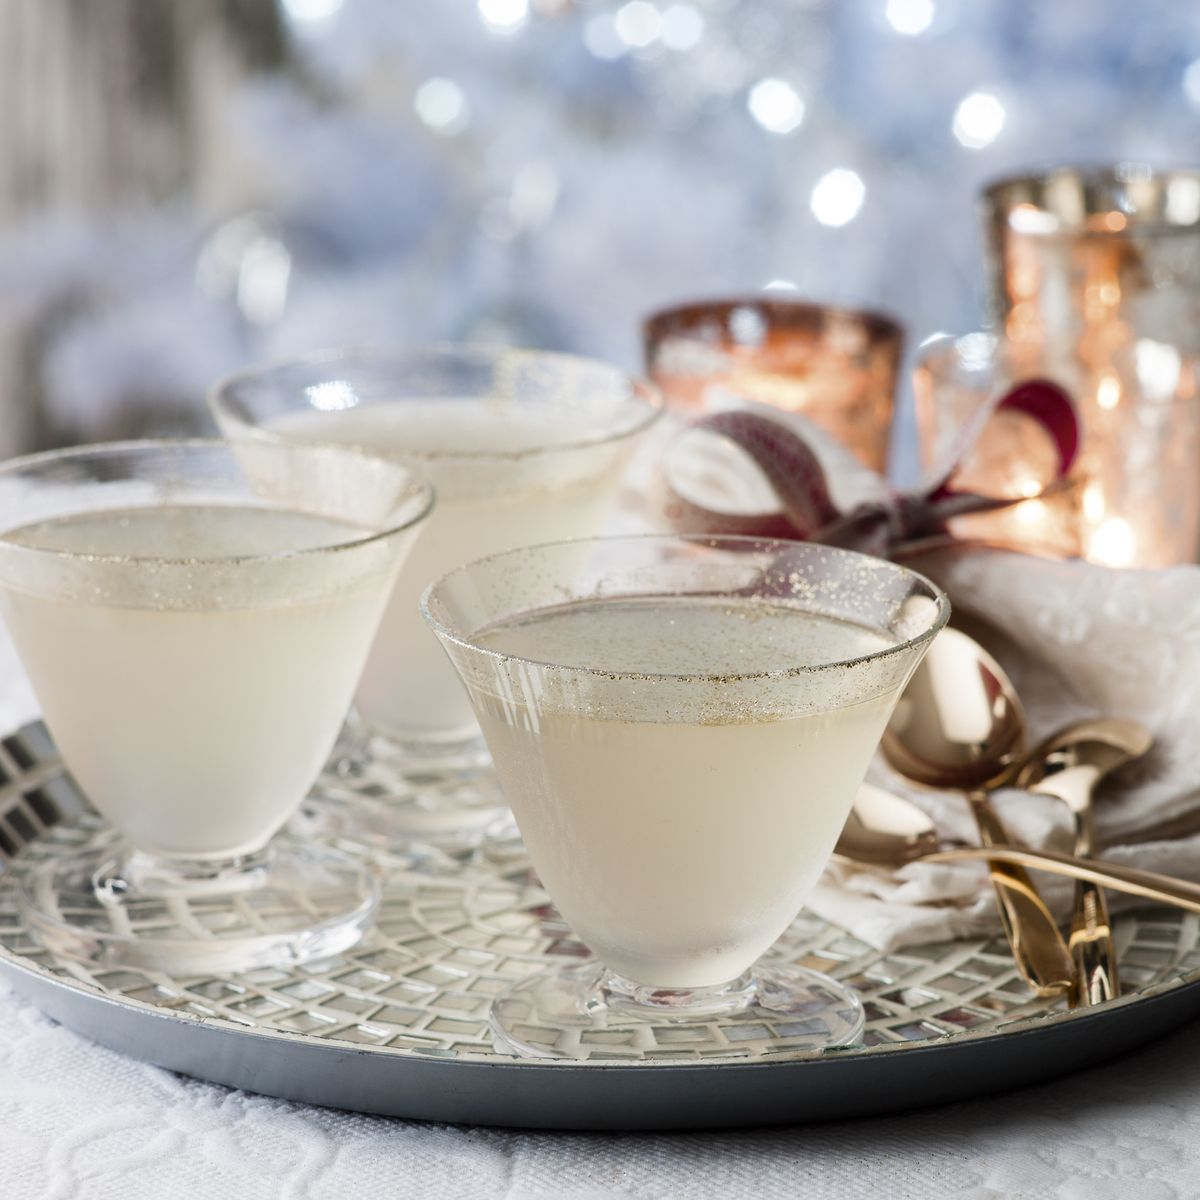 Try our grown up version of jelly with this limoncello and prosecco dessert